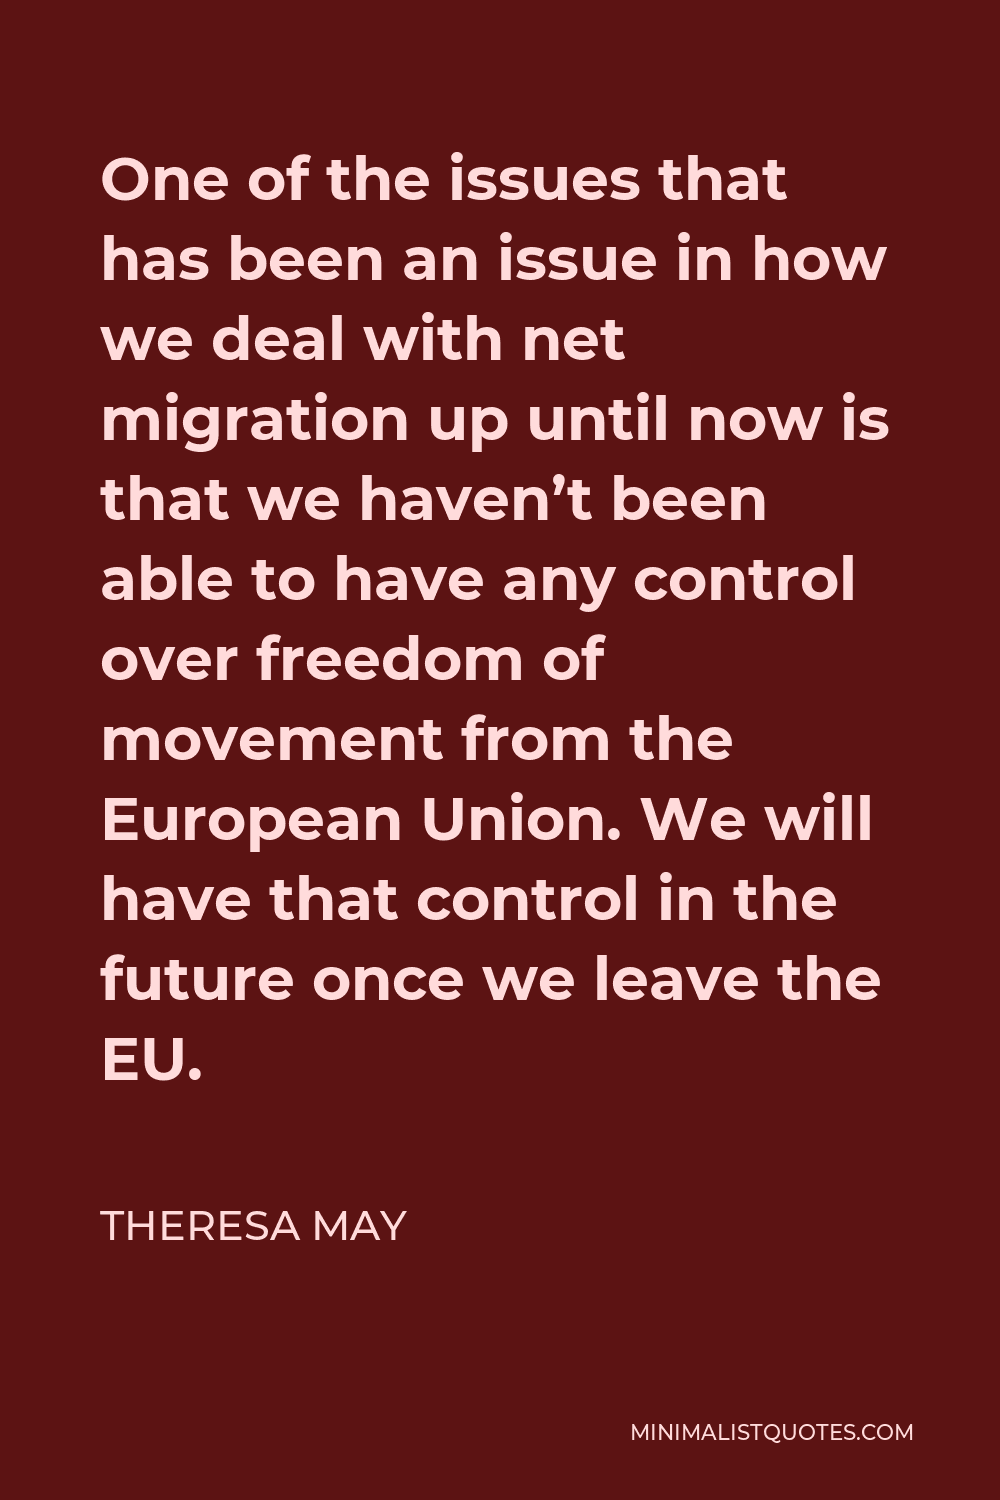 Theresa May Quote - One of the issues that has been an issue in how we deal with net migration up until now is that we haven’t been able to have any control over freedom of movement from the European Union. We will have that control in the future once we leave the EU.